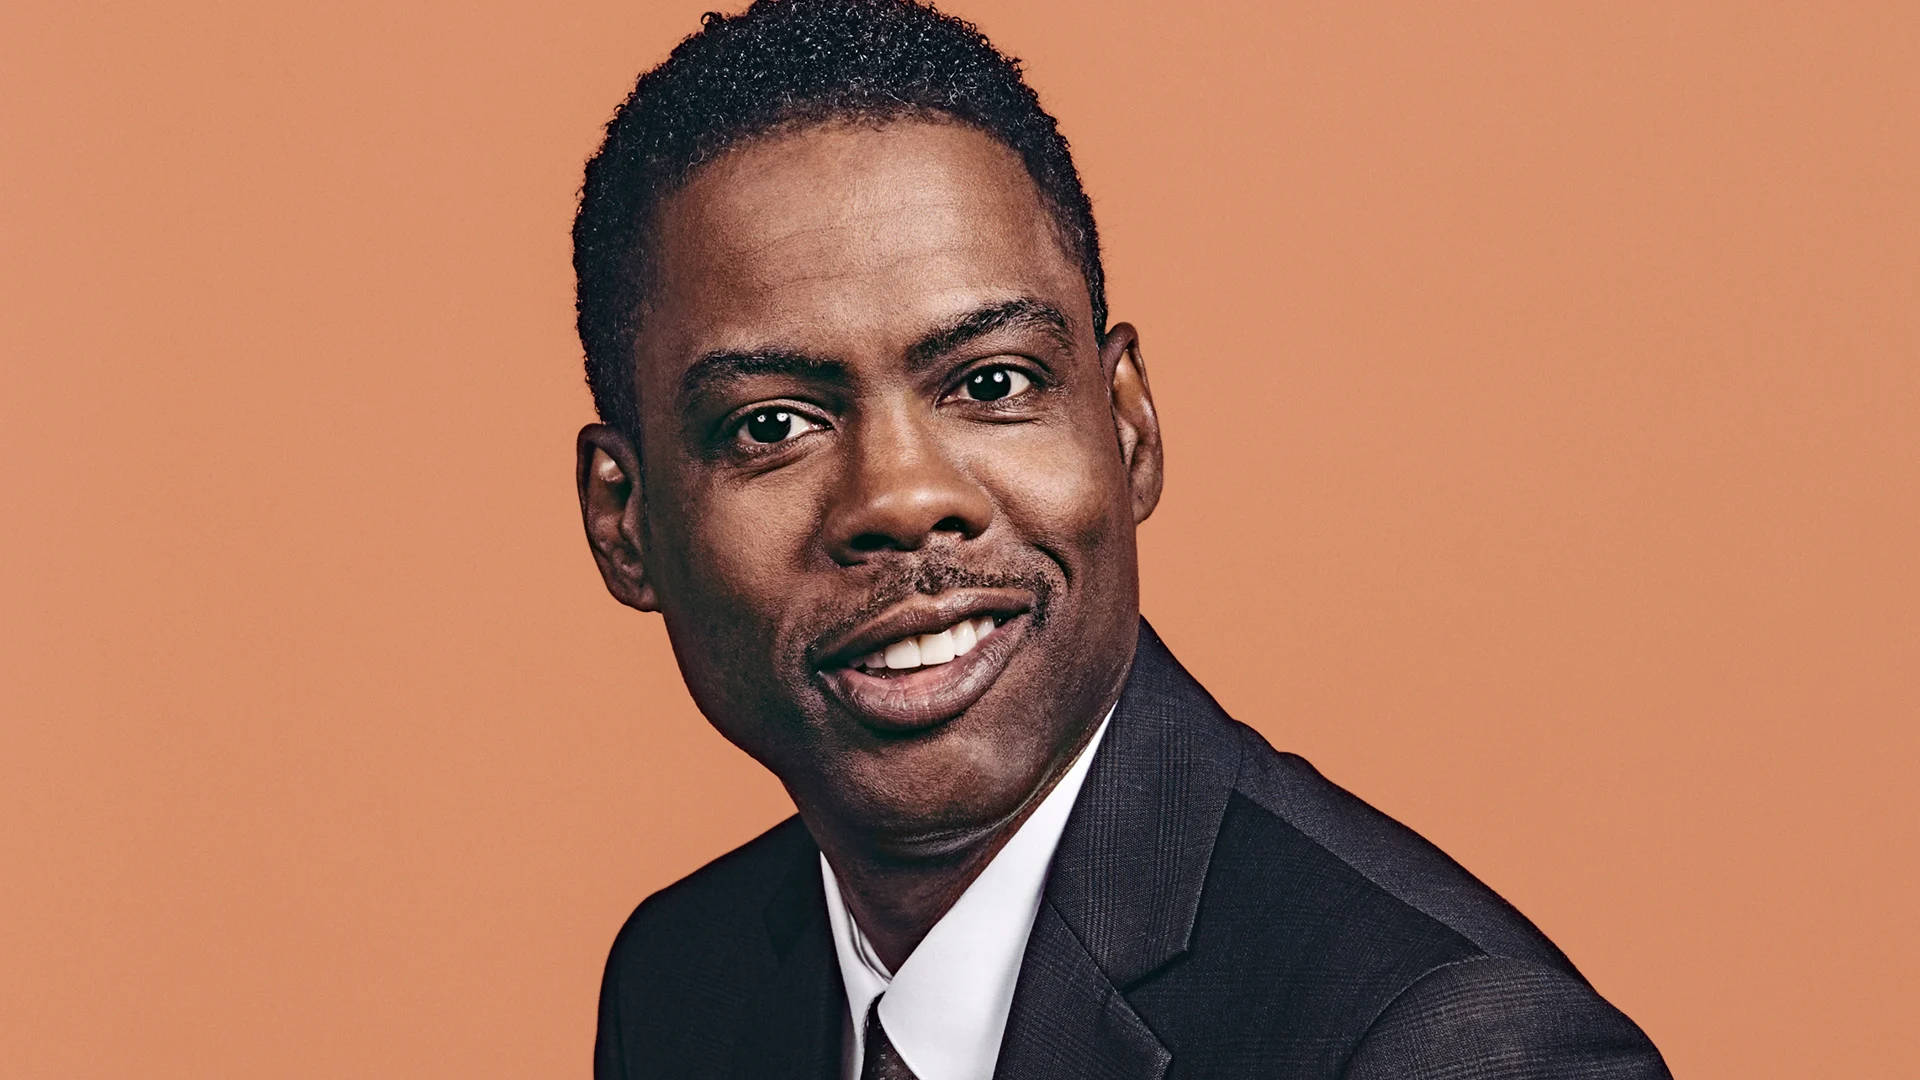 Chris Rock In Thought Wallpaper